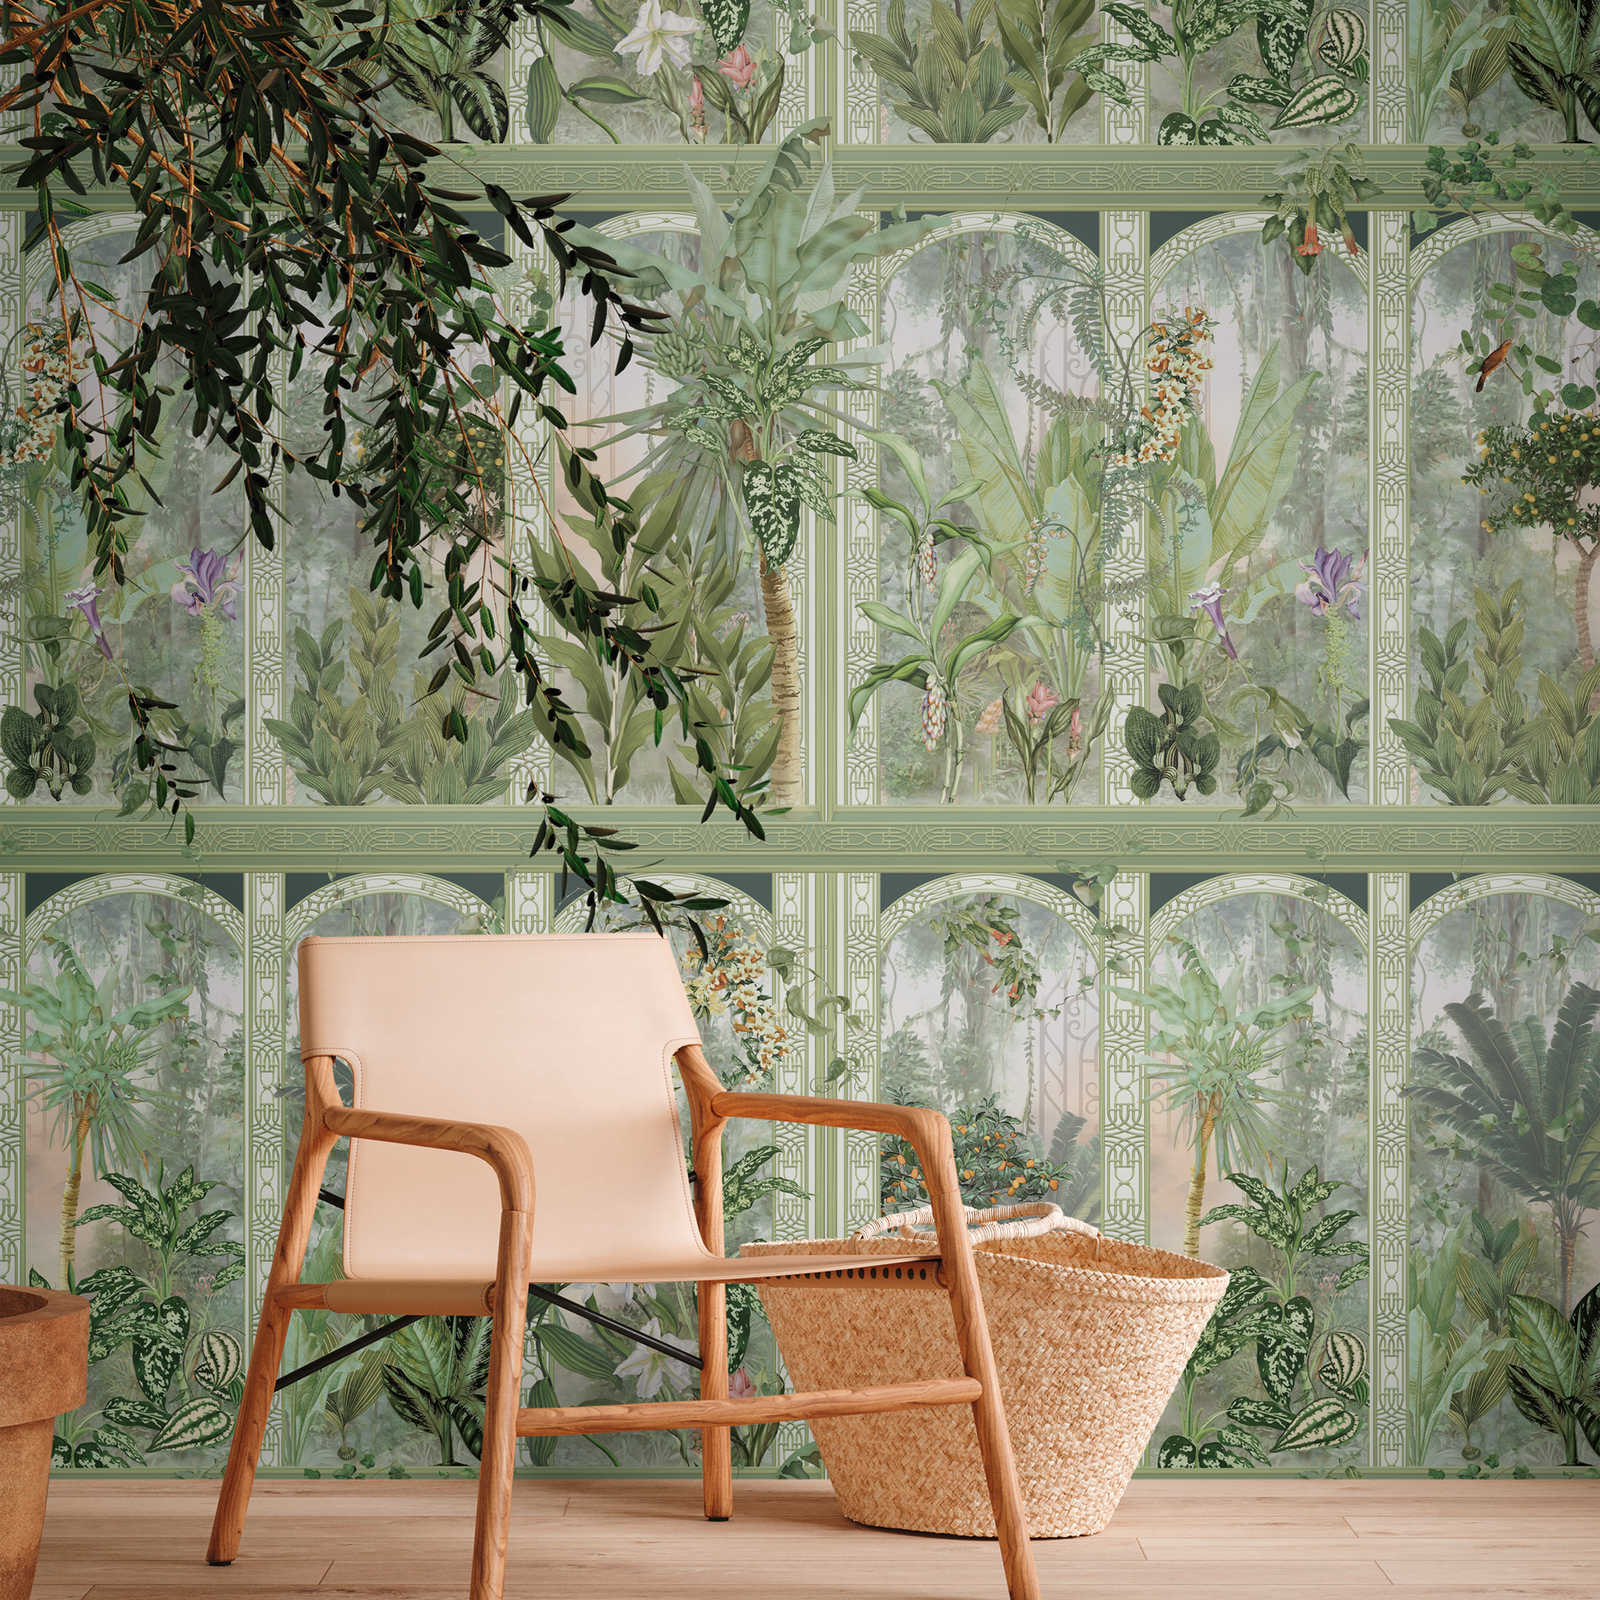 Wallpaper jungle motif with large leaves and flowers - green, brown, white
